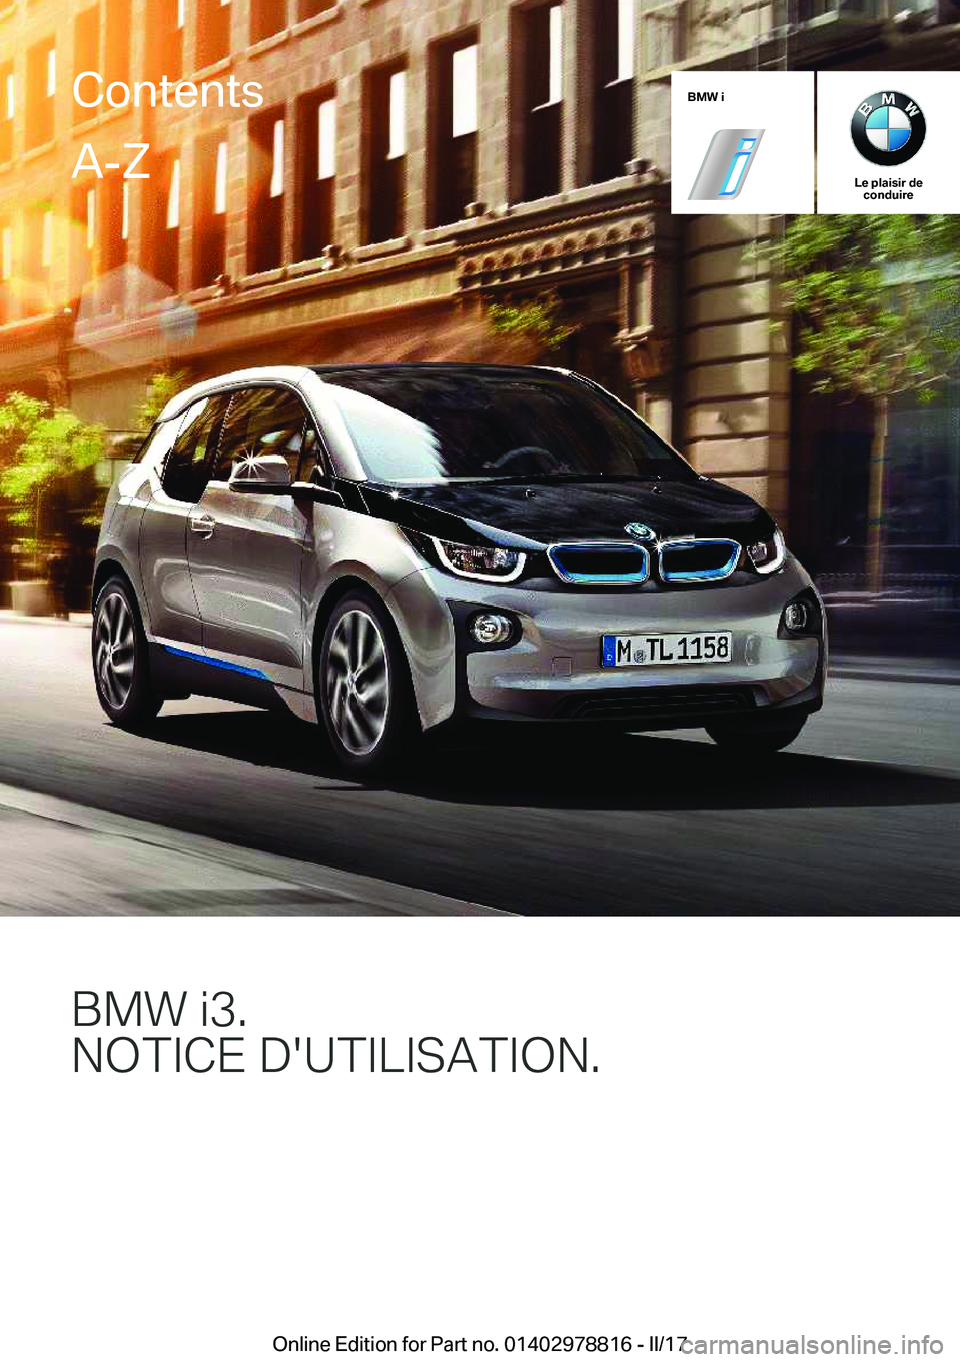 BMW I3 2017  Notices Demploi (in French) �B�M�W��i
�L�e��p�l�a�i�s�i�r��d�e�c�o�n�d�u�i�r�e
�B�M�8��J��
�N�O�T�*�C�E��D��U�T�*�L�*�S�A�T�*�O�N�
�C�o�n�t�e�n�t�s�A�-�Z
�O�n�l�i�n�e� �E�d�i�t�i�o�n� �f�o�r� �P�a�r�t� �n�o�.� �0�1�4�0�